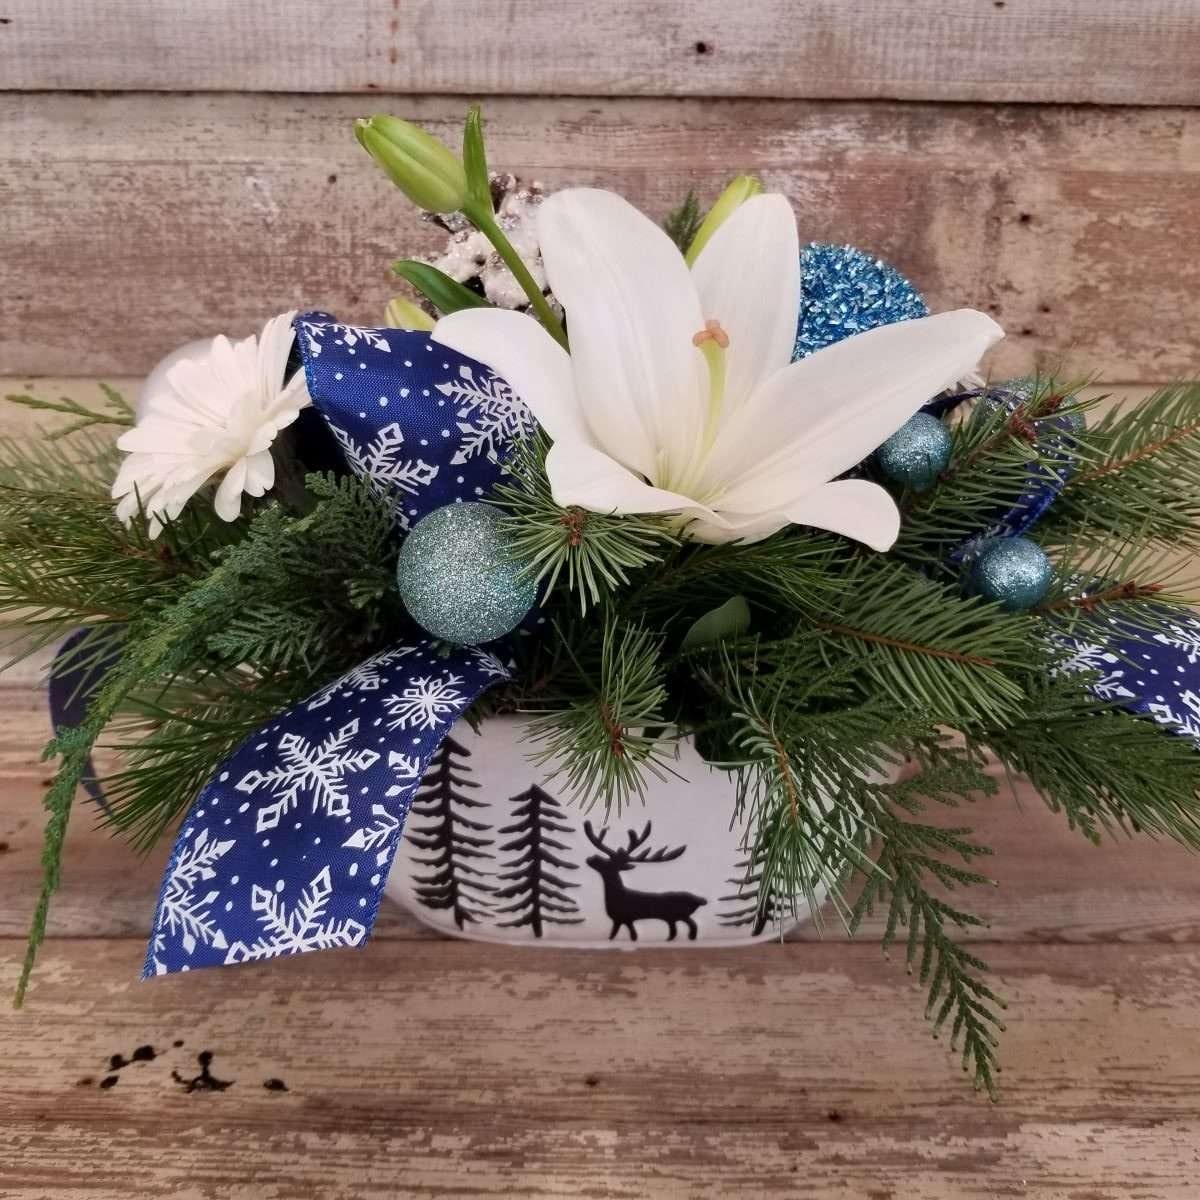 Floral Arrangement in a Christmas ceramic container